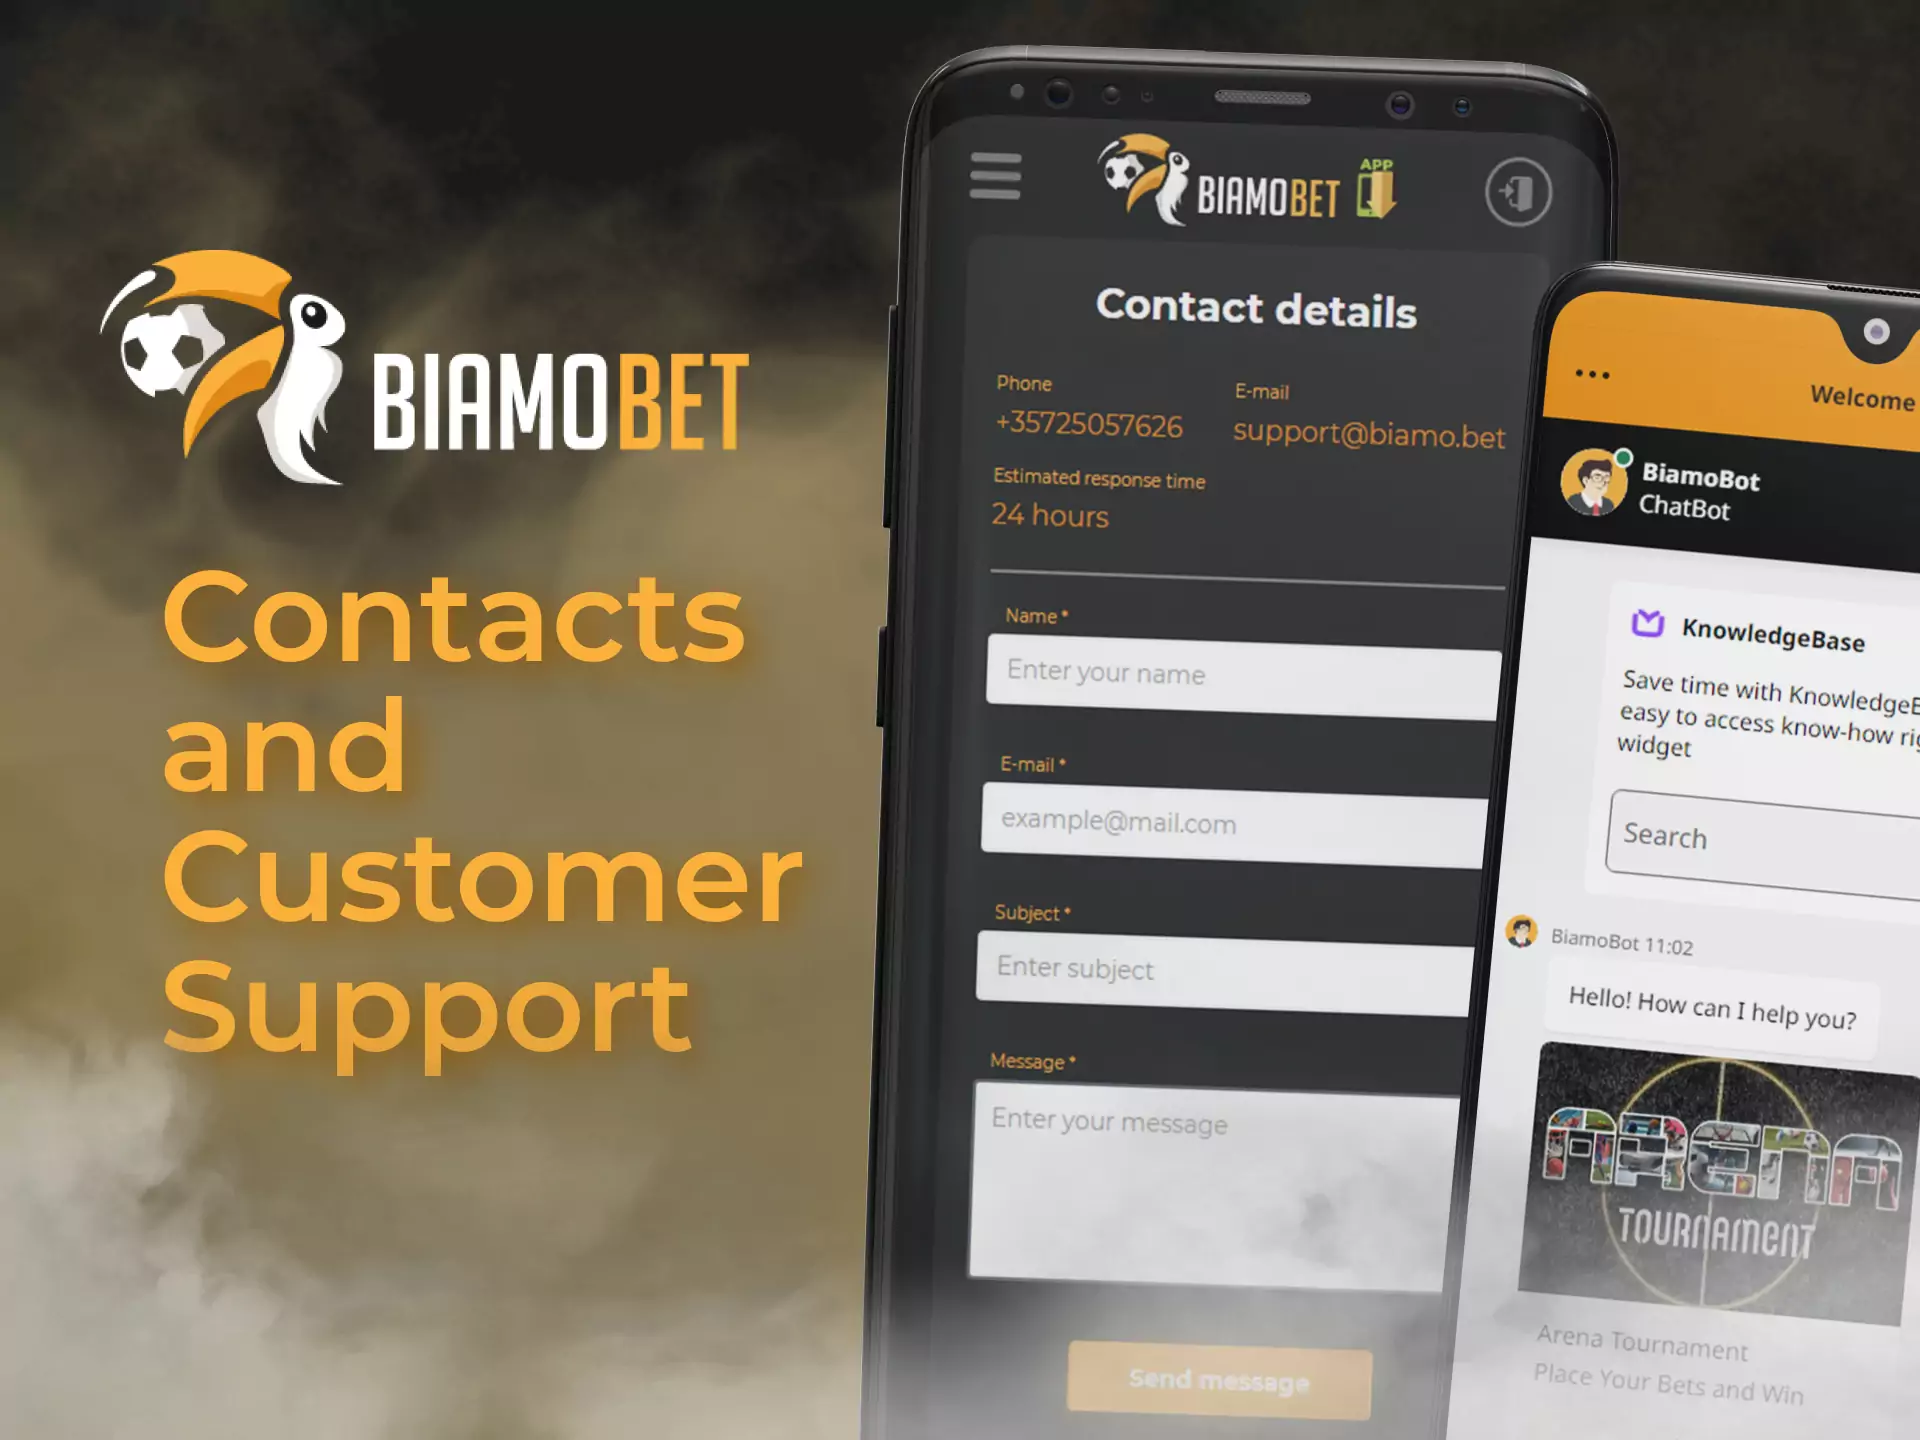 If you have issues with betting on the site, let customer support know and help you.